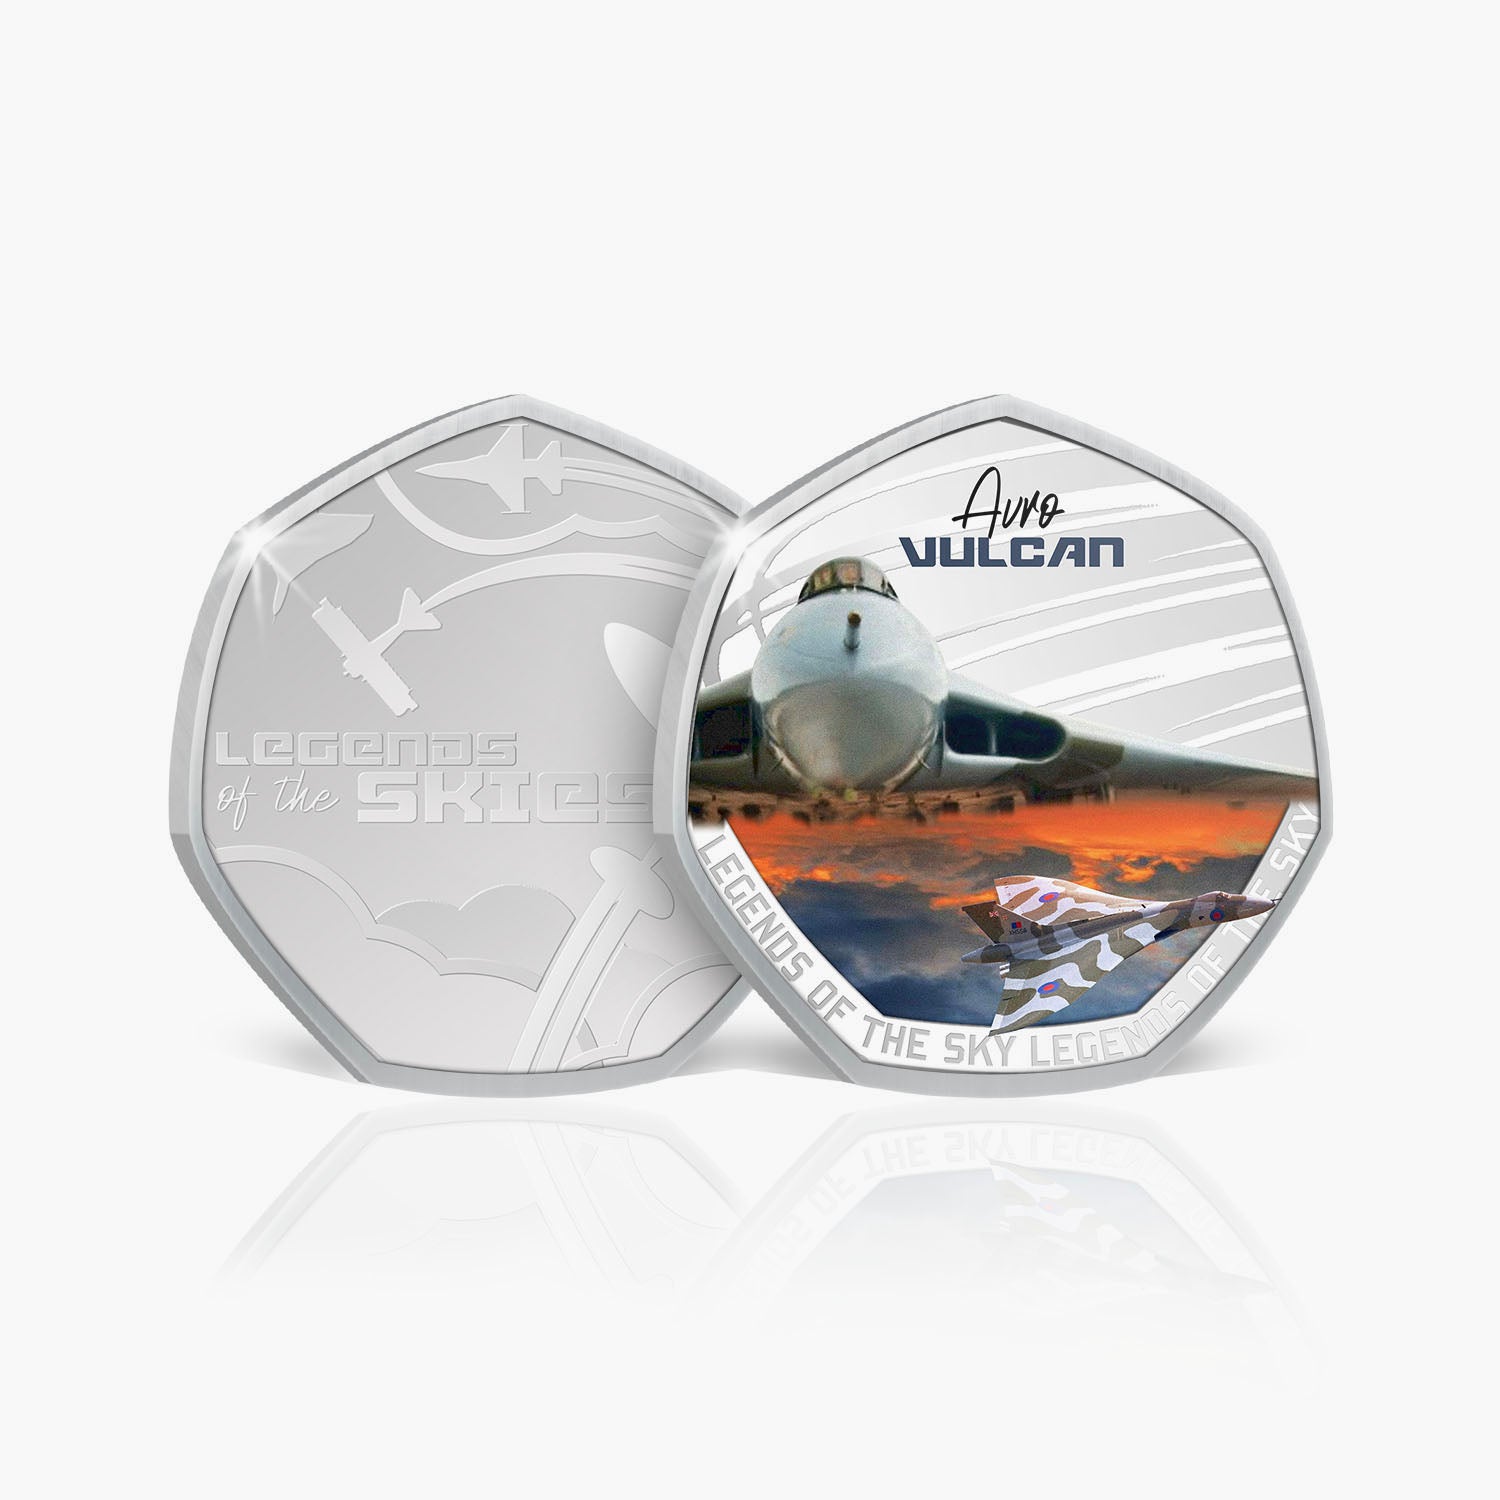 Legends of the Skies Vulcan Silver-Plated Commemorative